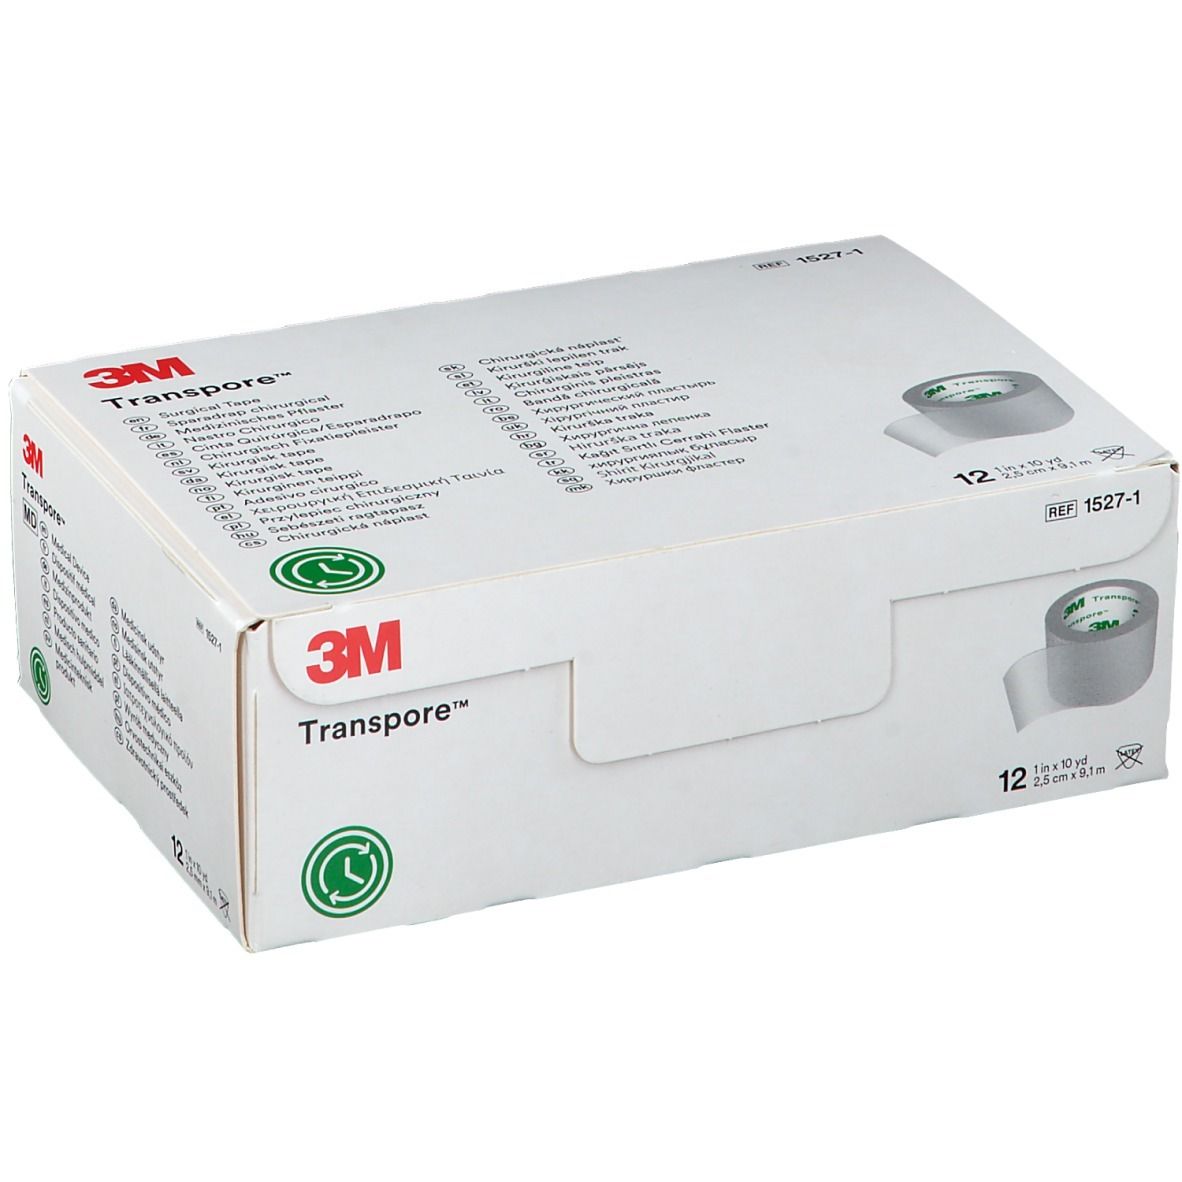 Image of 3M™ Transpore™ medizinisches Pflaster 2,5 x 9,1 m